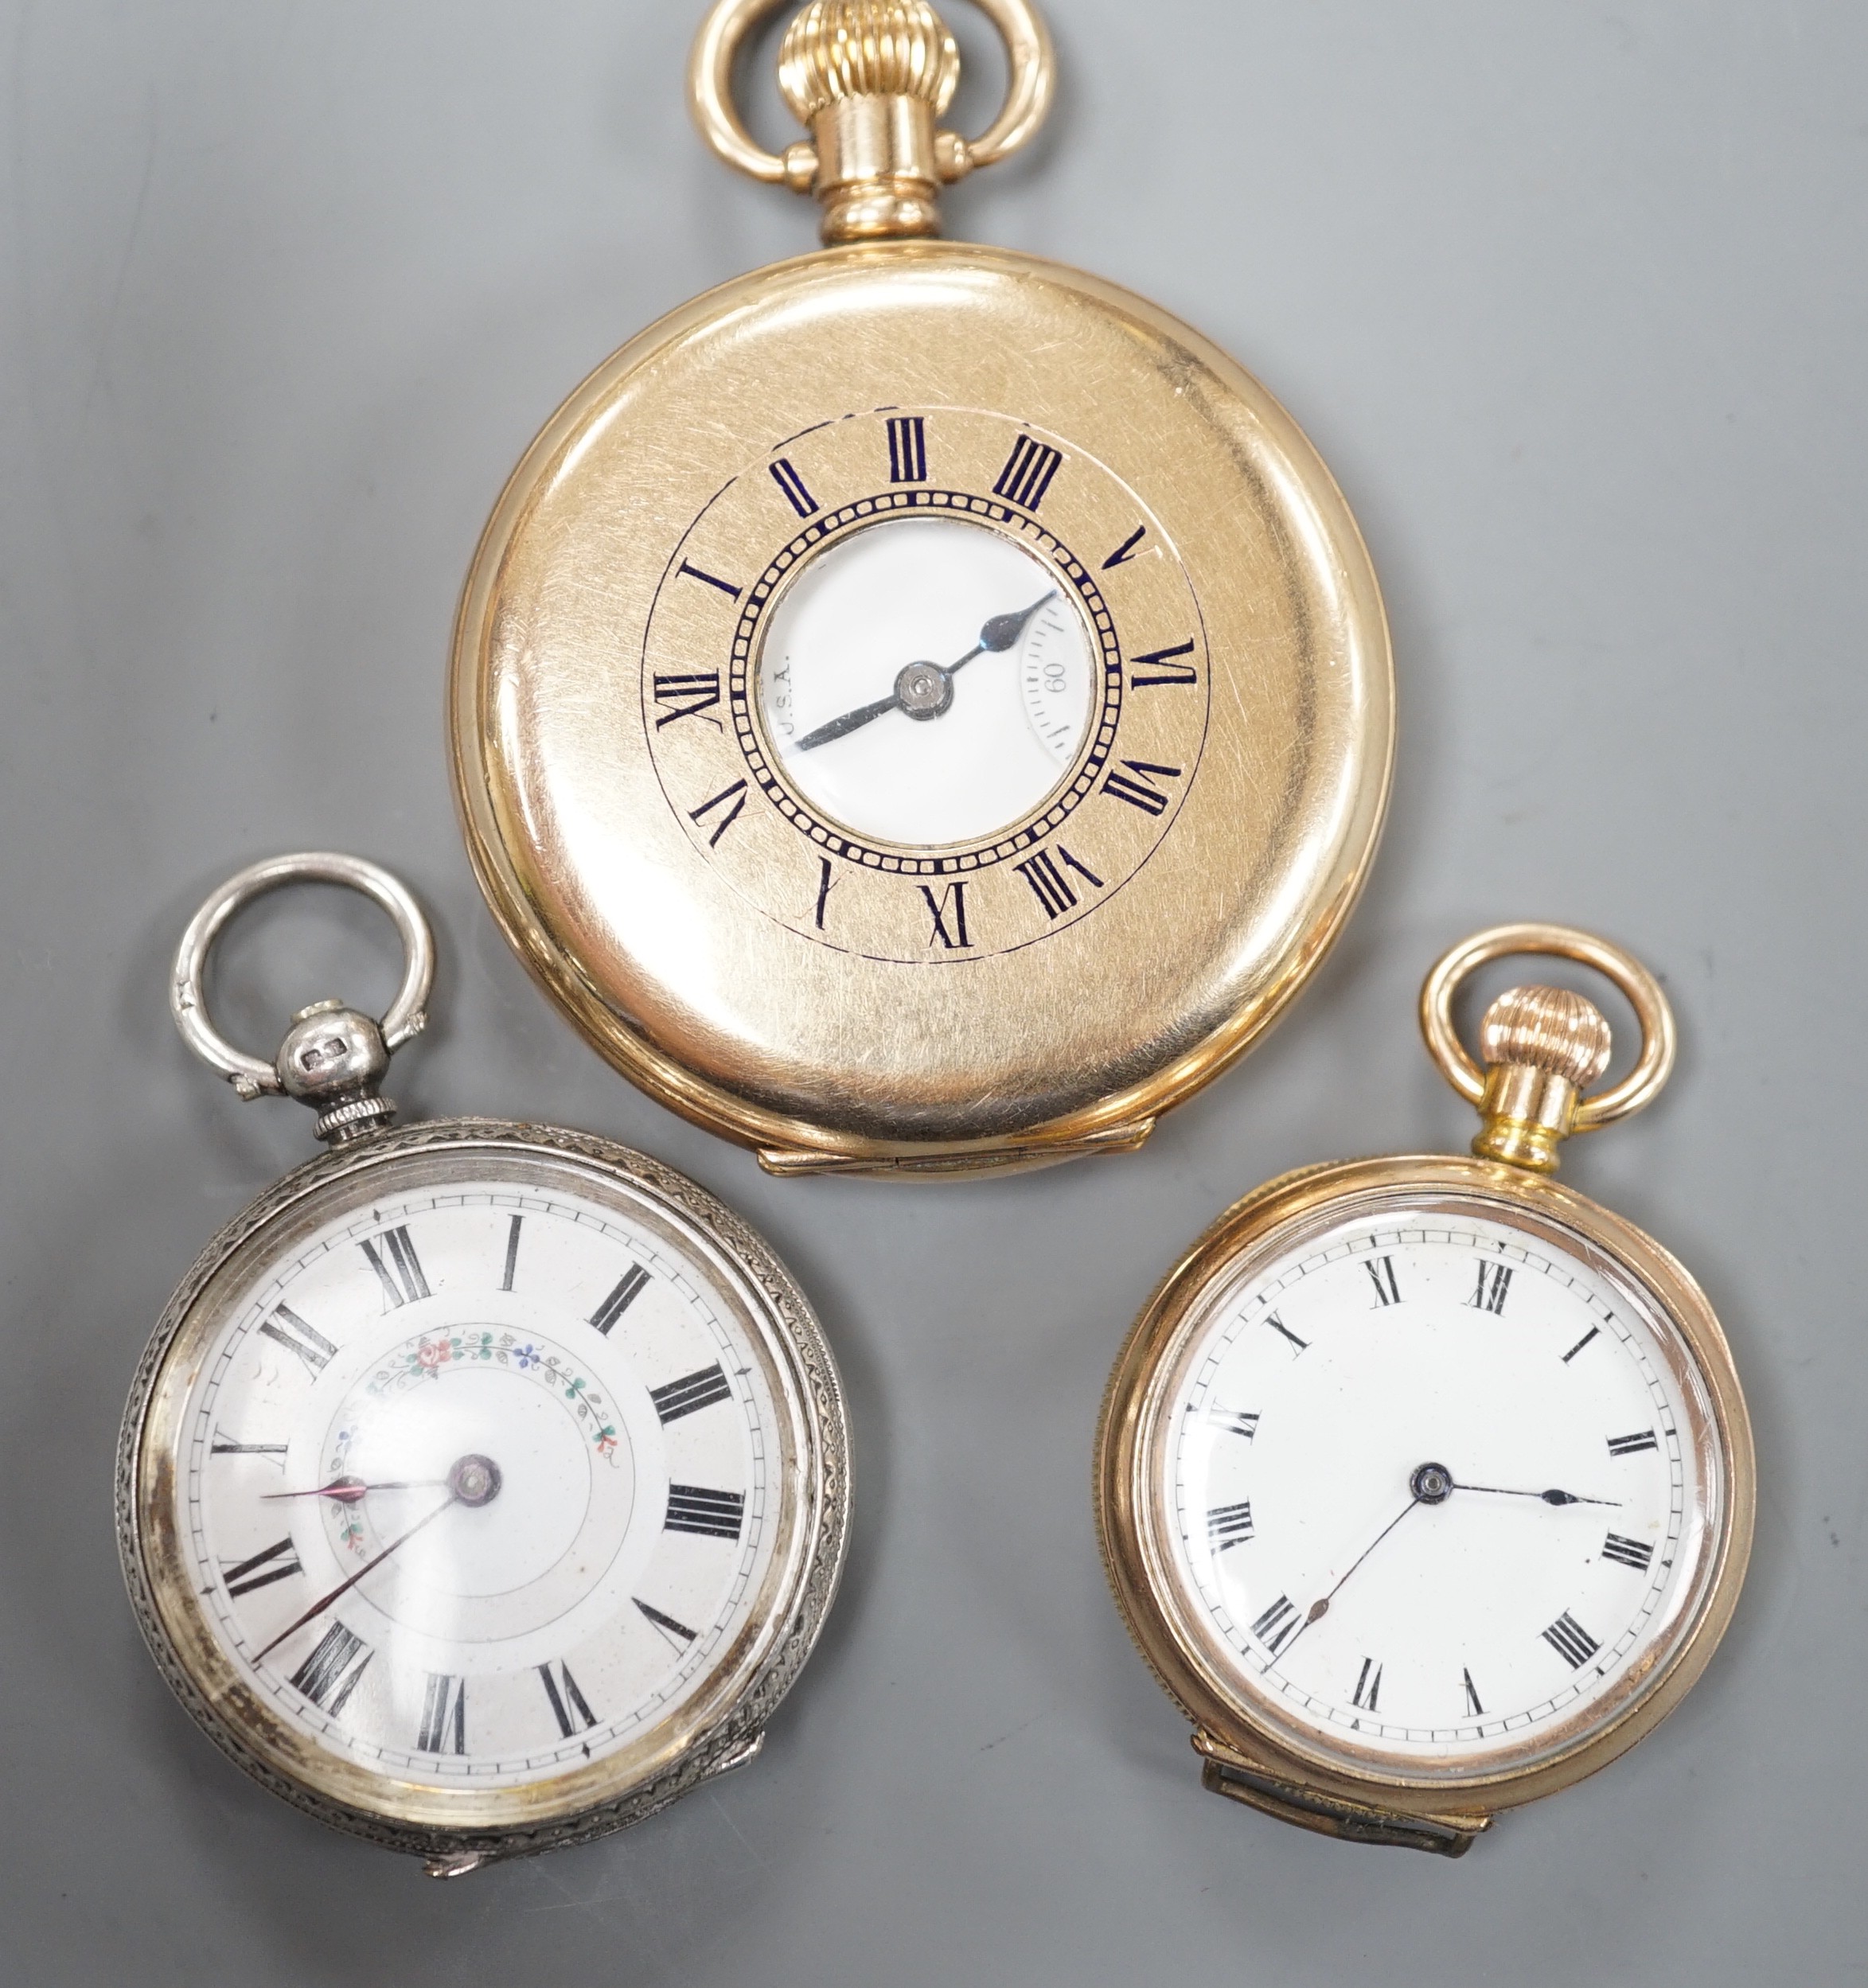 A gold plated Waltham keyless half hunter pocket watch, a George V silver fob watch and a gold plated fob watch.